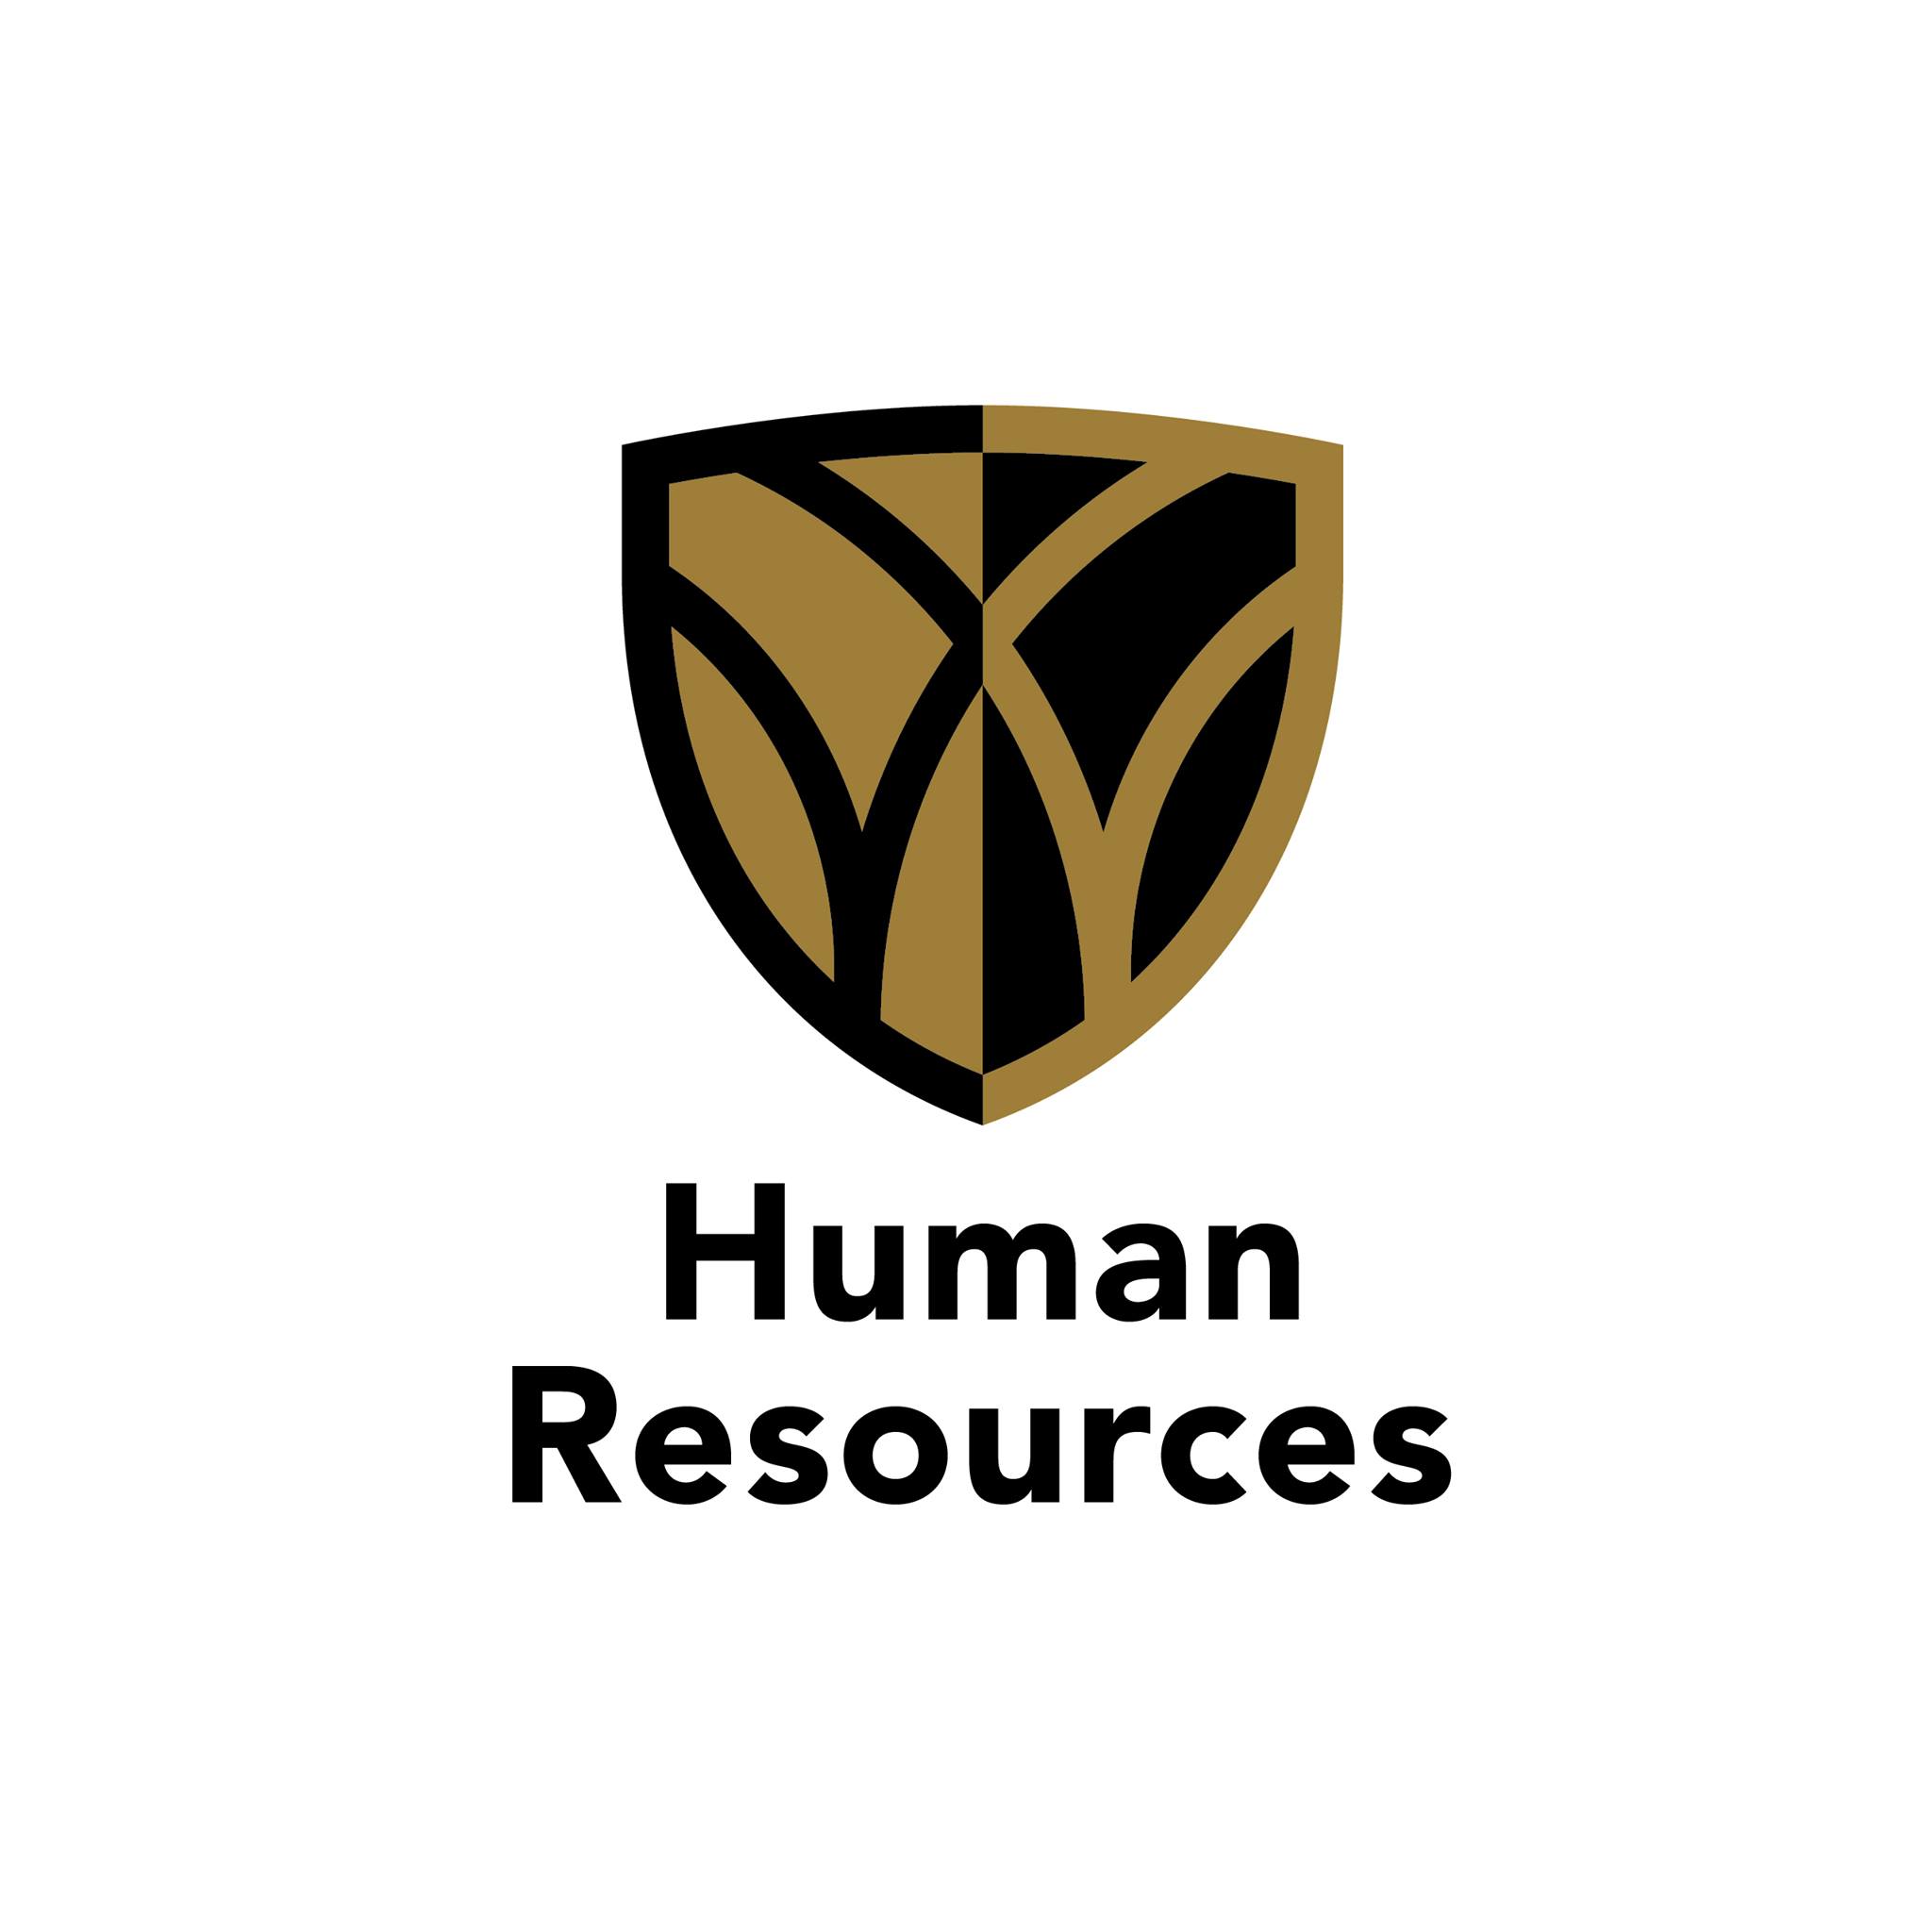 WFU Human Resources & Office of Sustainability